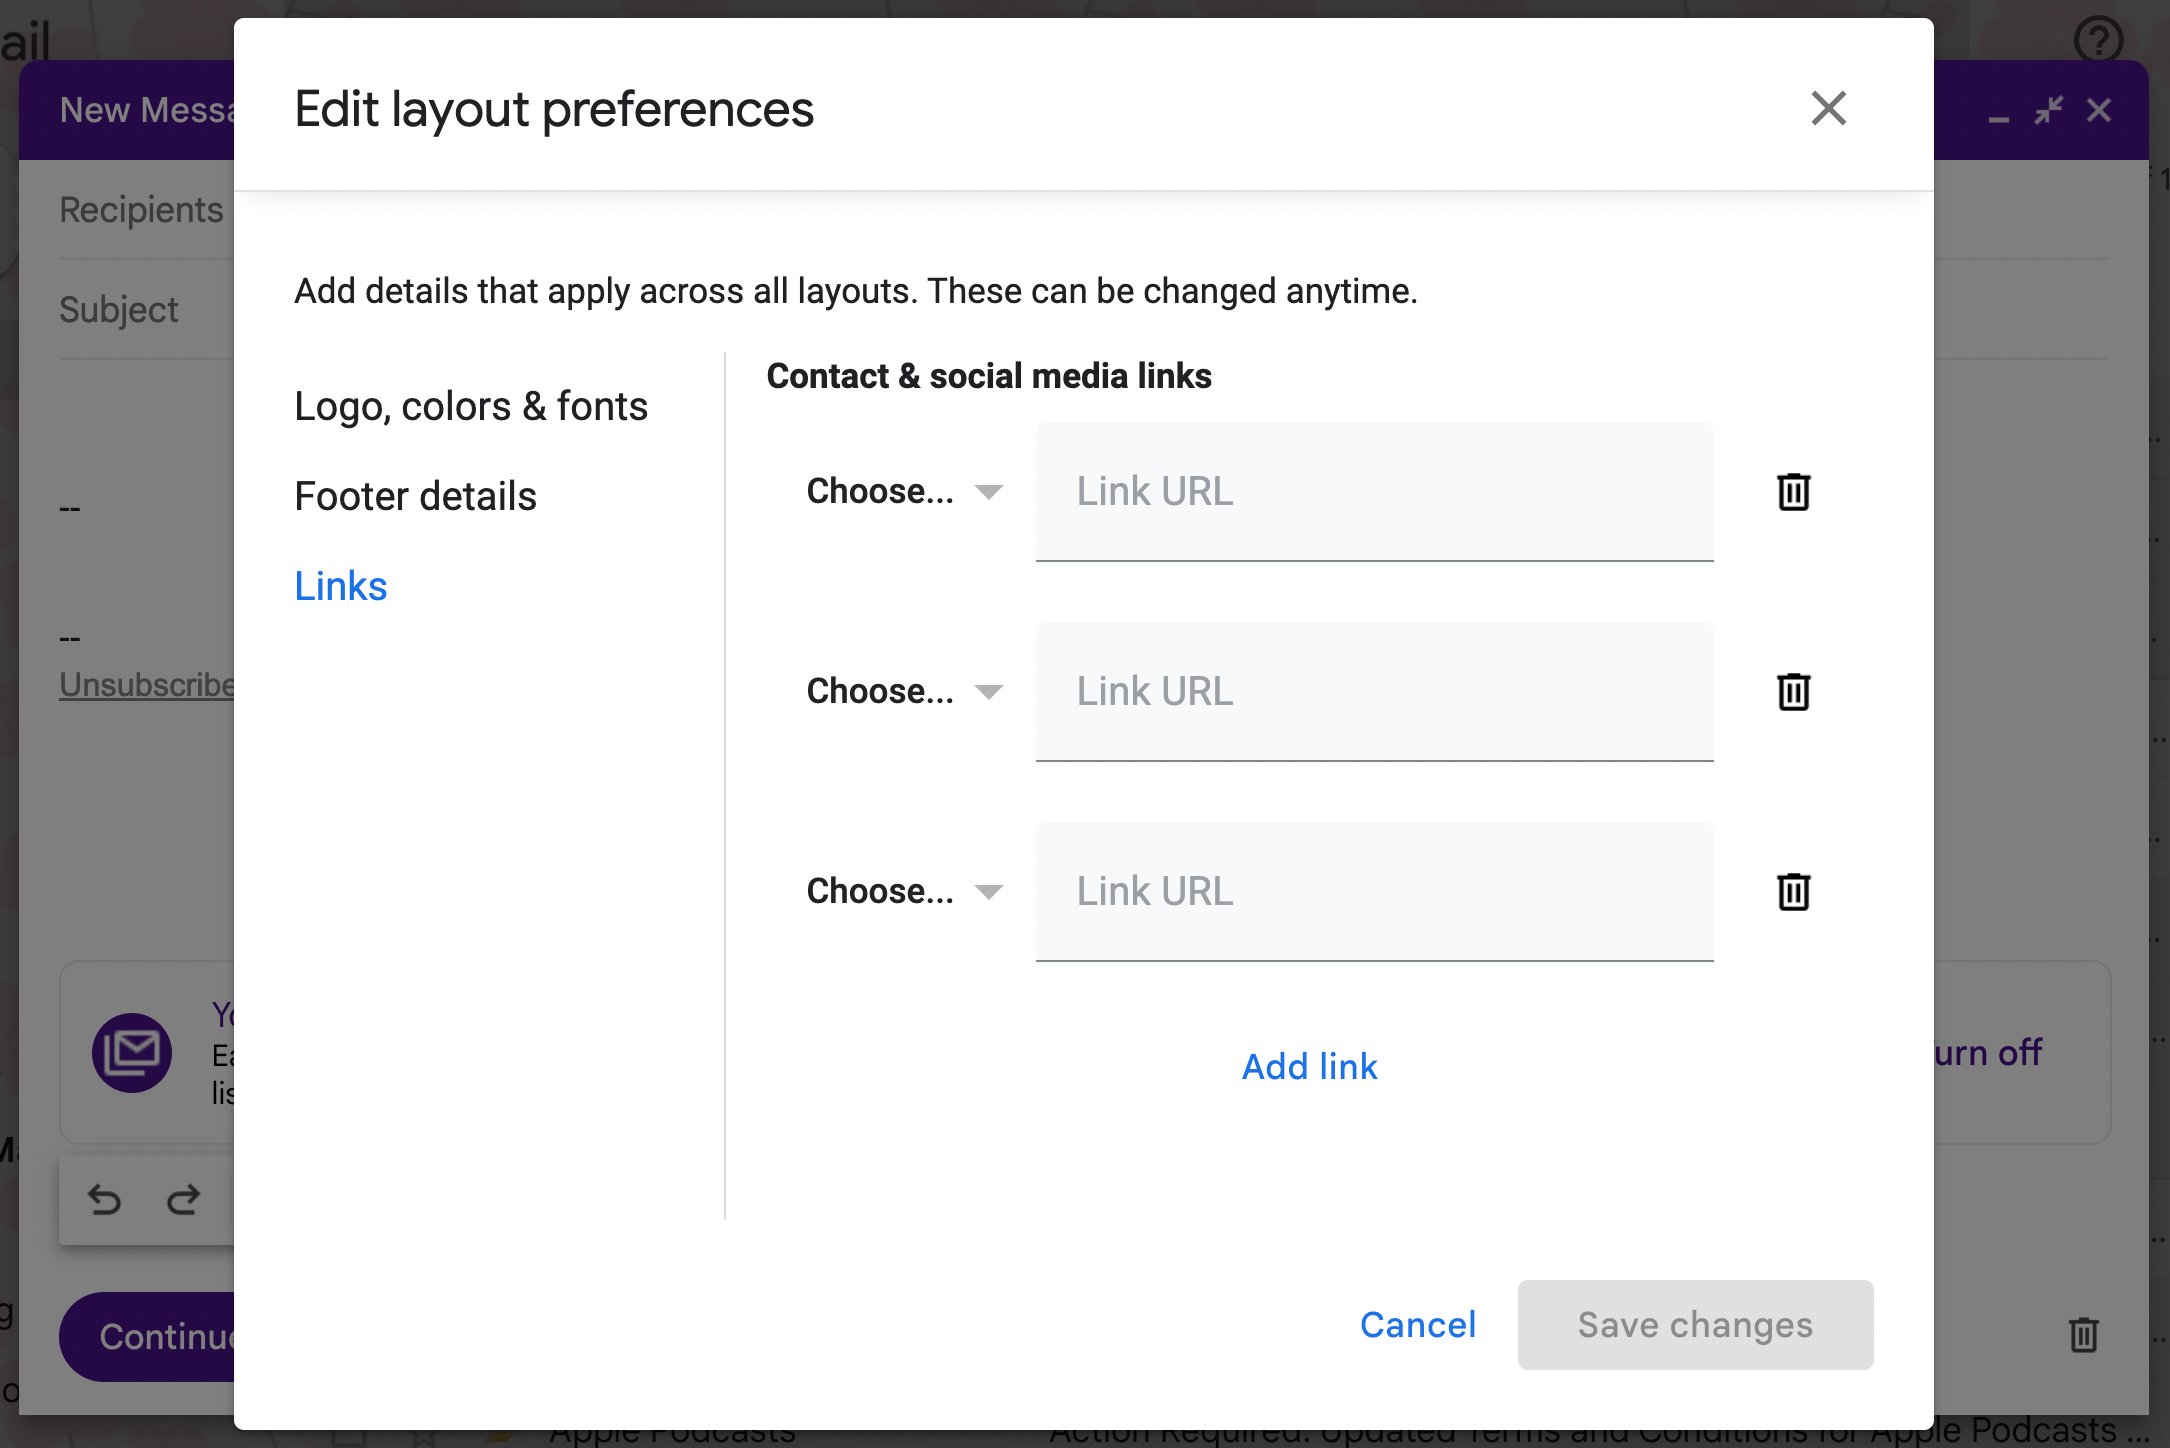 Change links in layout preferences.